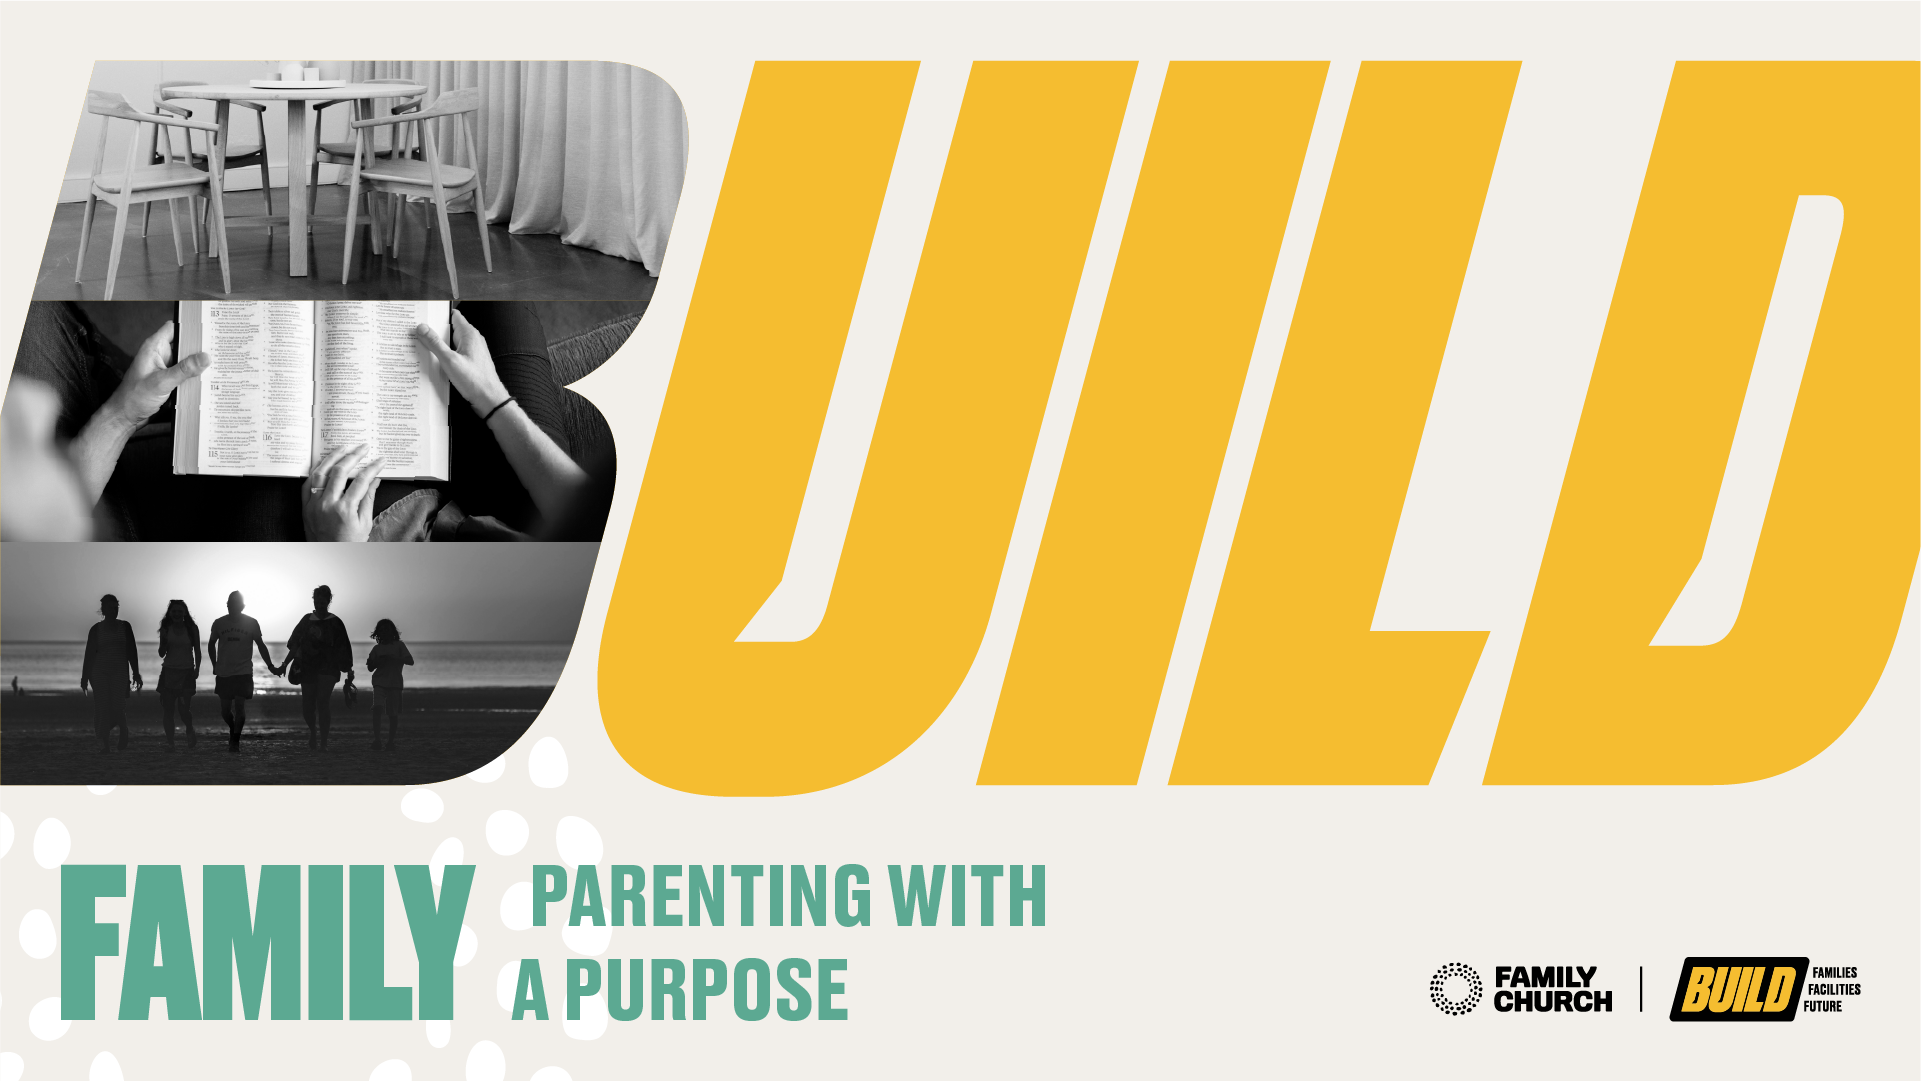 Build: Families – Parenting with Purpose